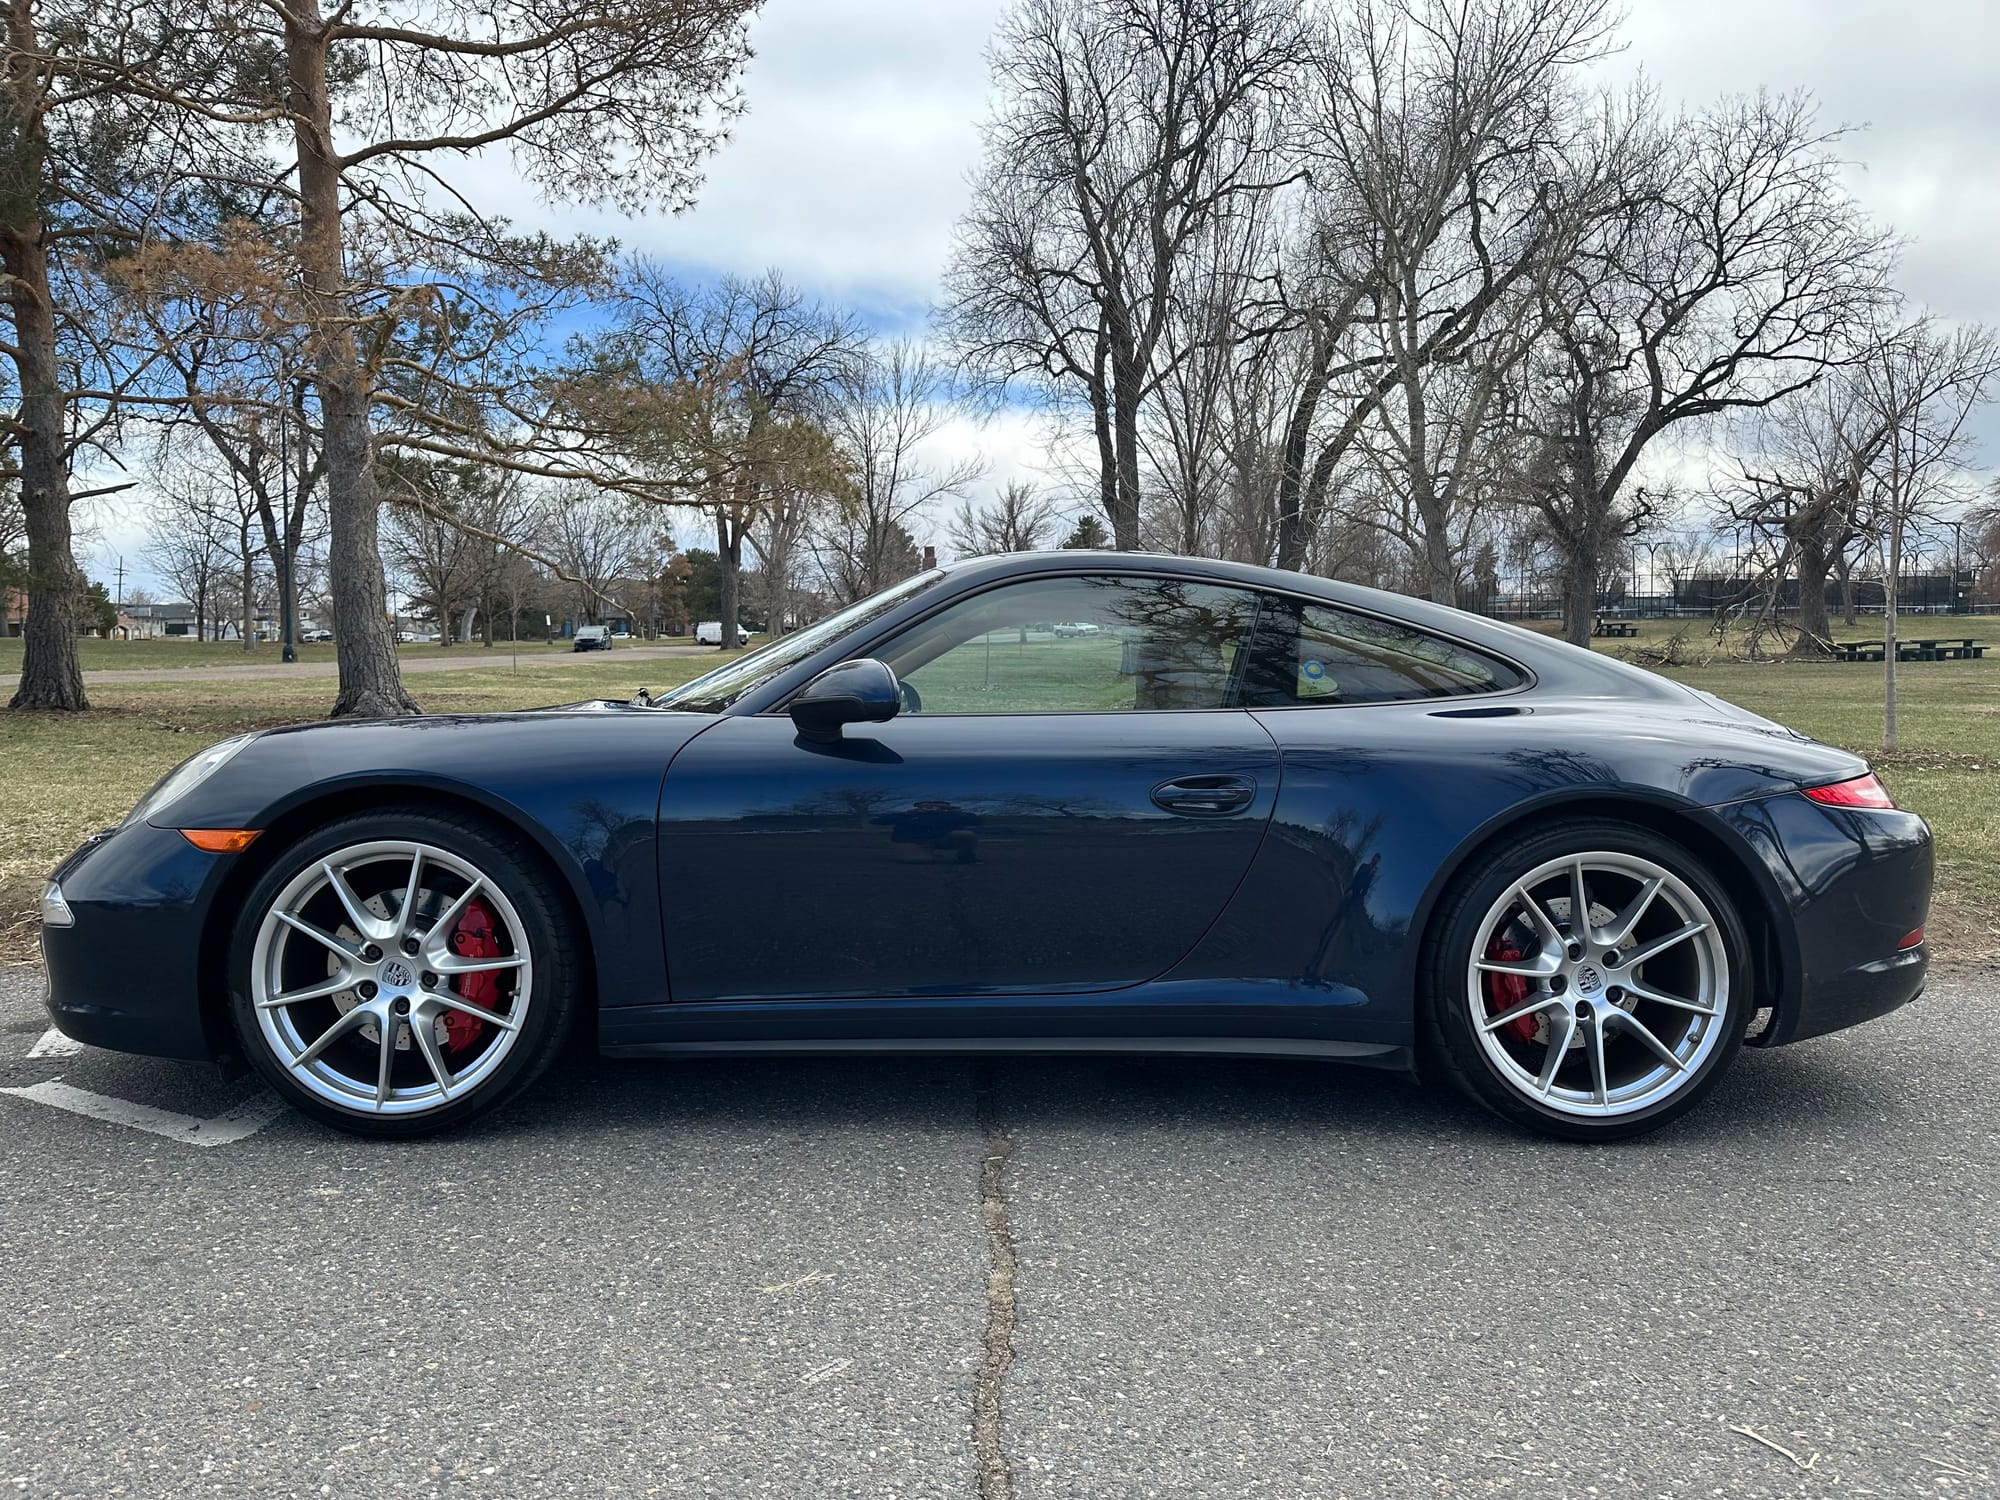 2014 Porsche 911 - 2014 911 Carrera 4S Coupe, Manual Transmission,  blue over beige, 41k miles - Used - VIN WP0AB2A97ES120106 - 41,211 Miles - 6 cyl - AWD - Manual - Coupe - Blue - Denver, CO 80212, United States